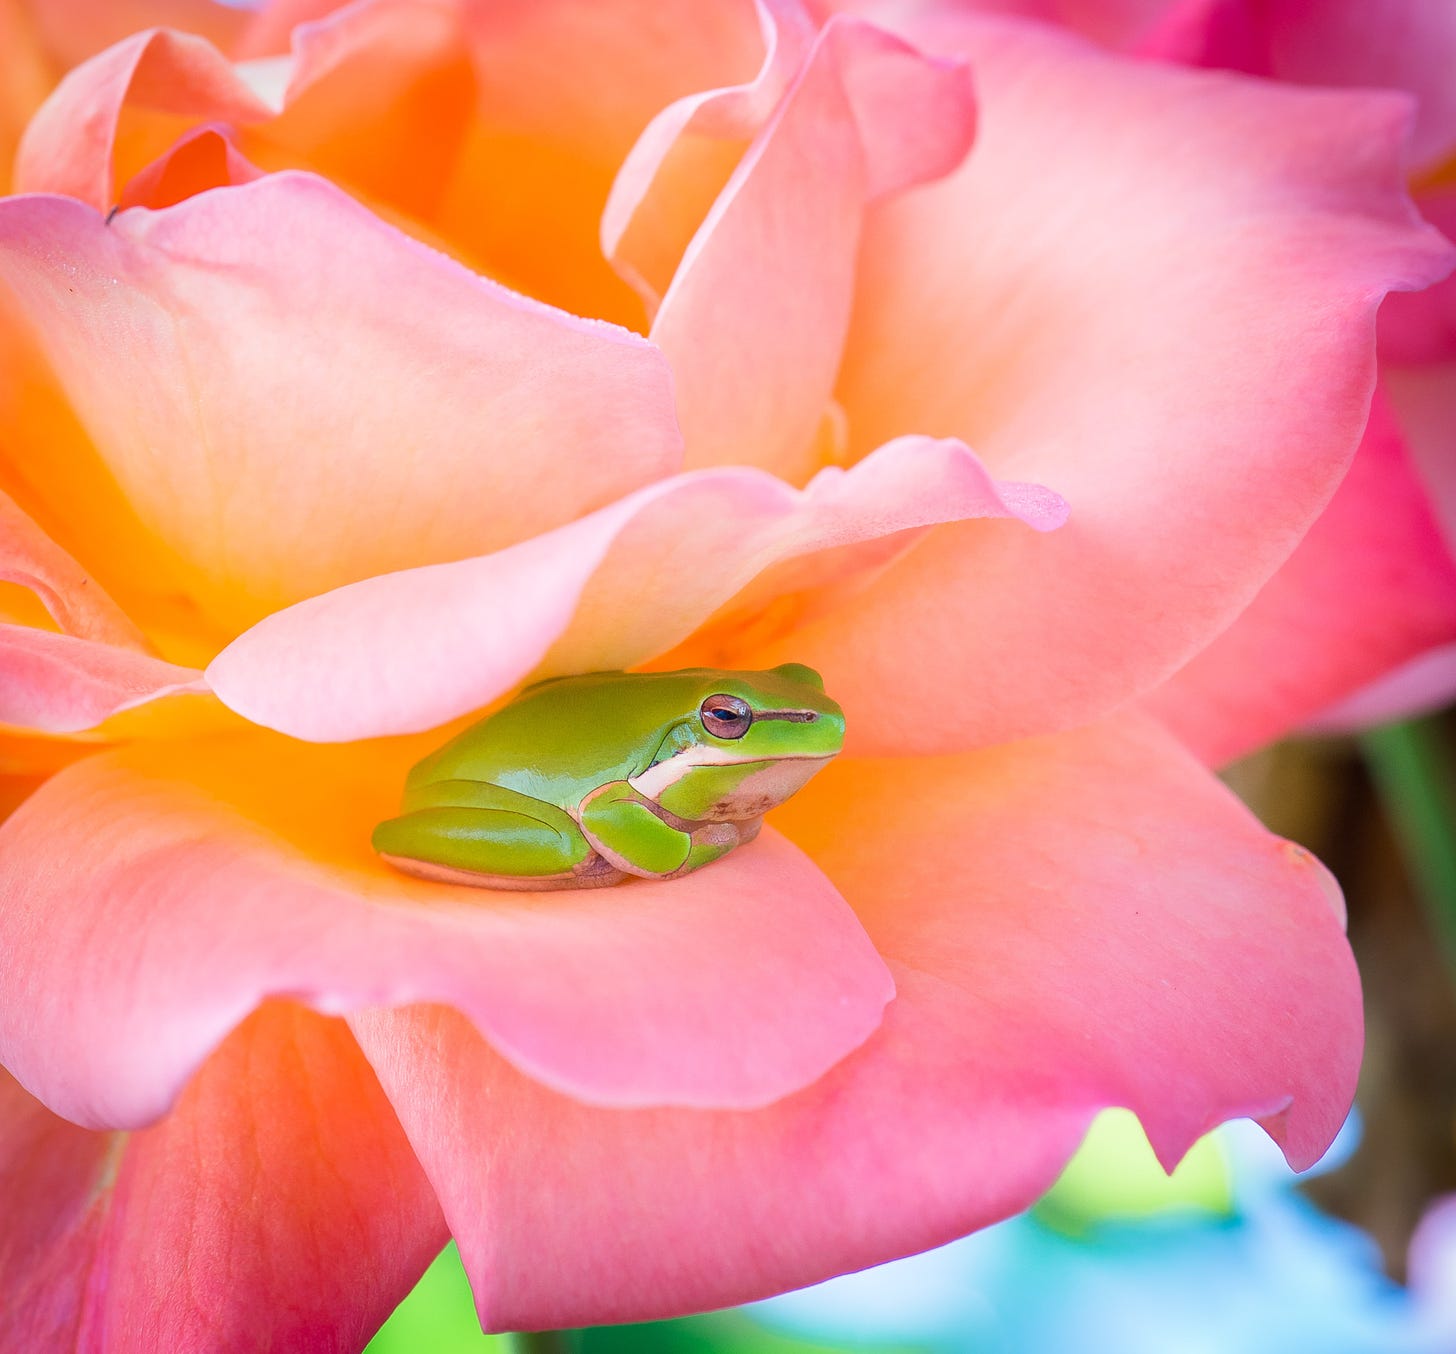 A tiny green frog sitting with its front legs tucked under its torso on the petal of a peach and pink rose